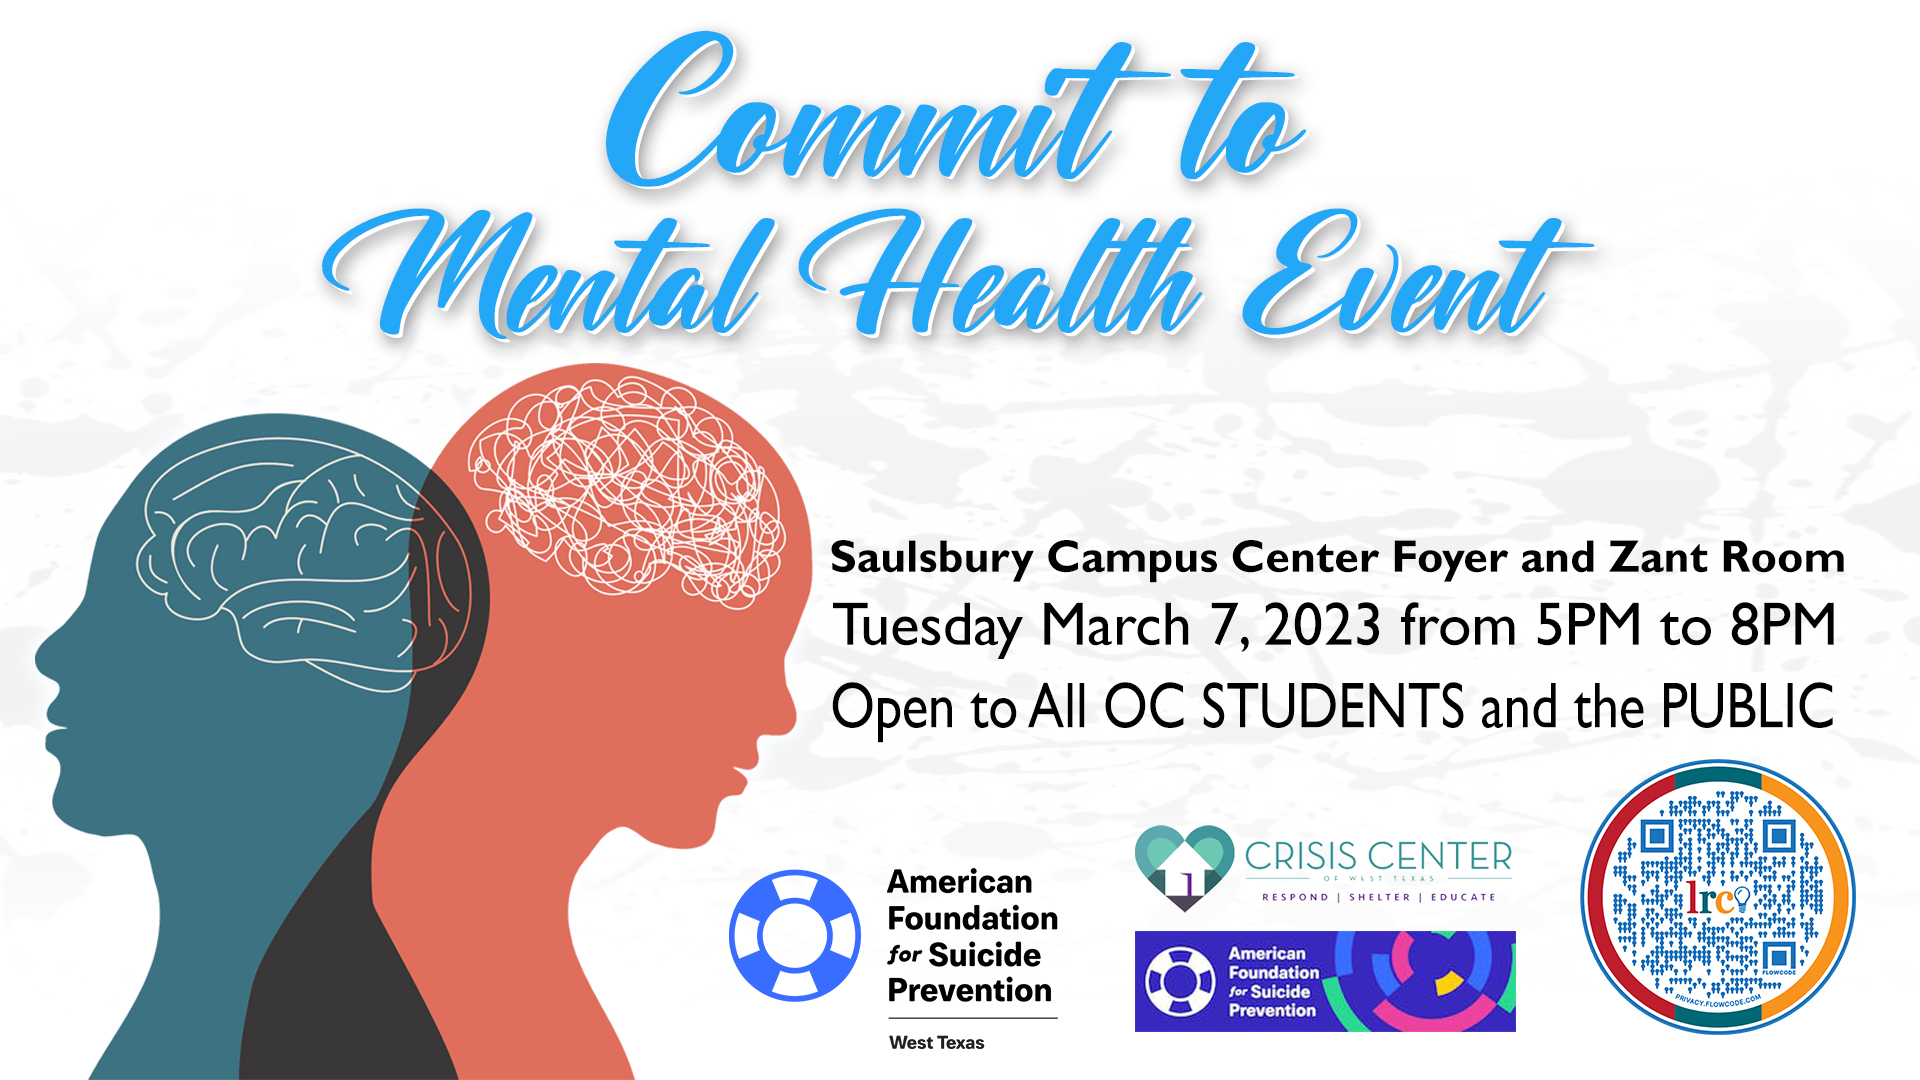 2023-OC-Commit-to-Mental-Health-Event-1920-x-1080.jpg